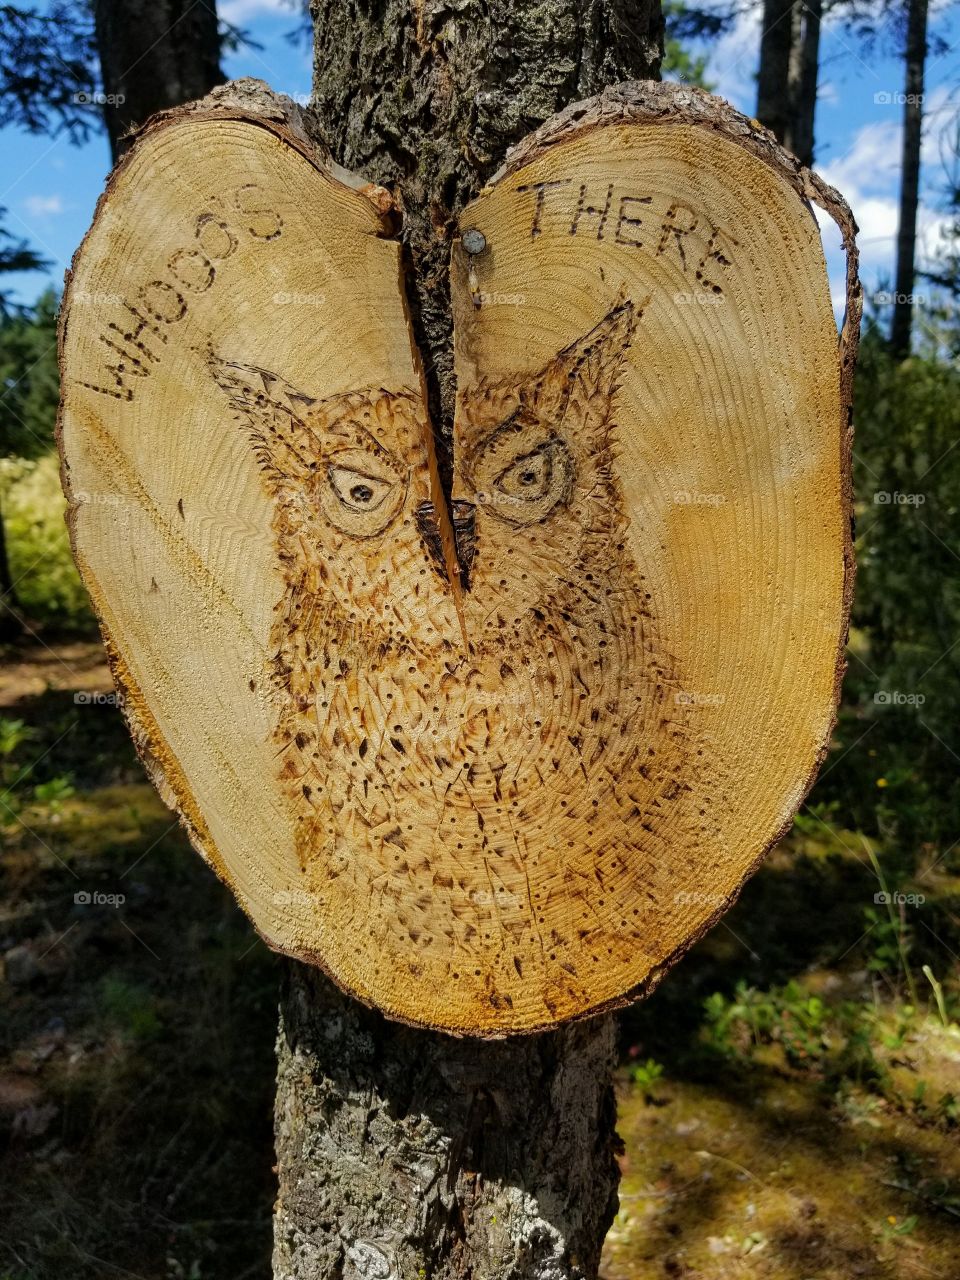 owl in the tree